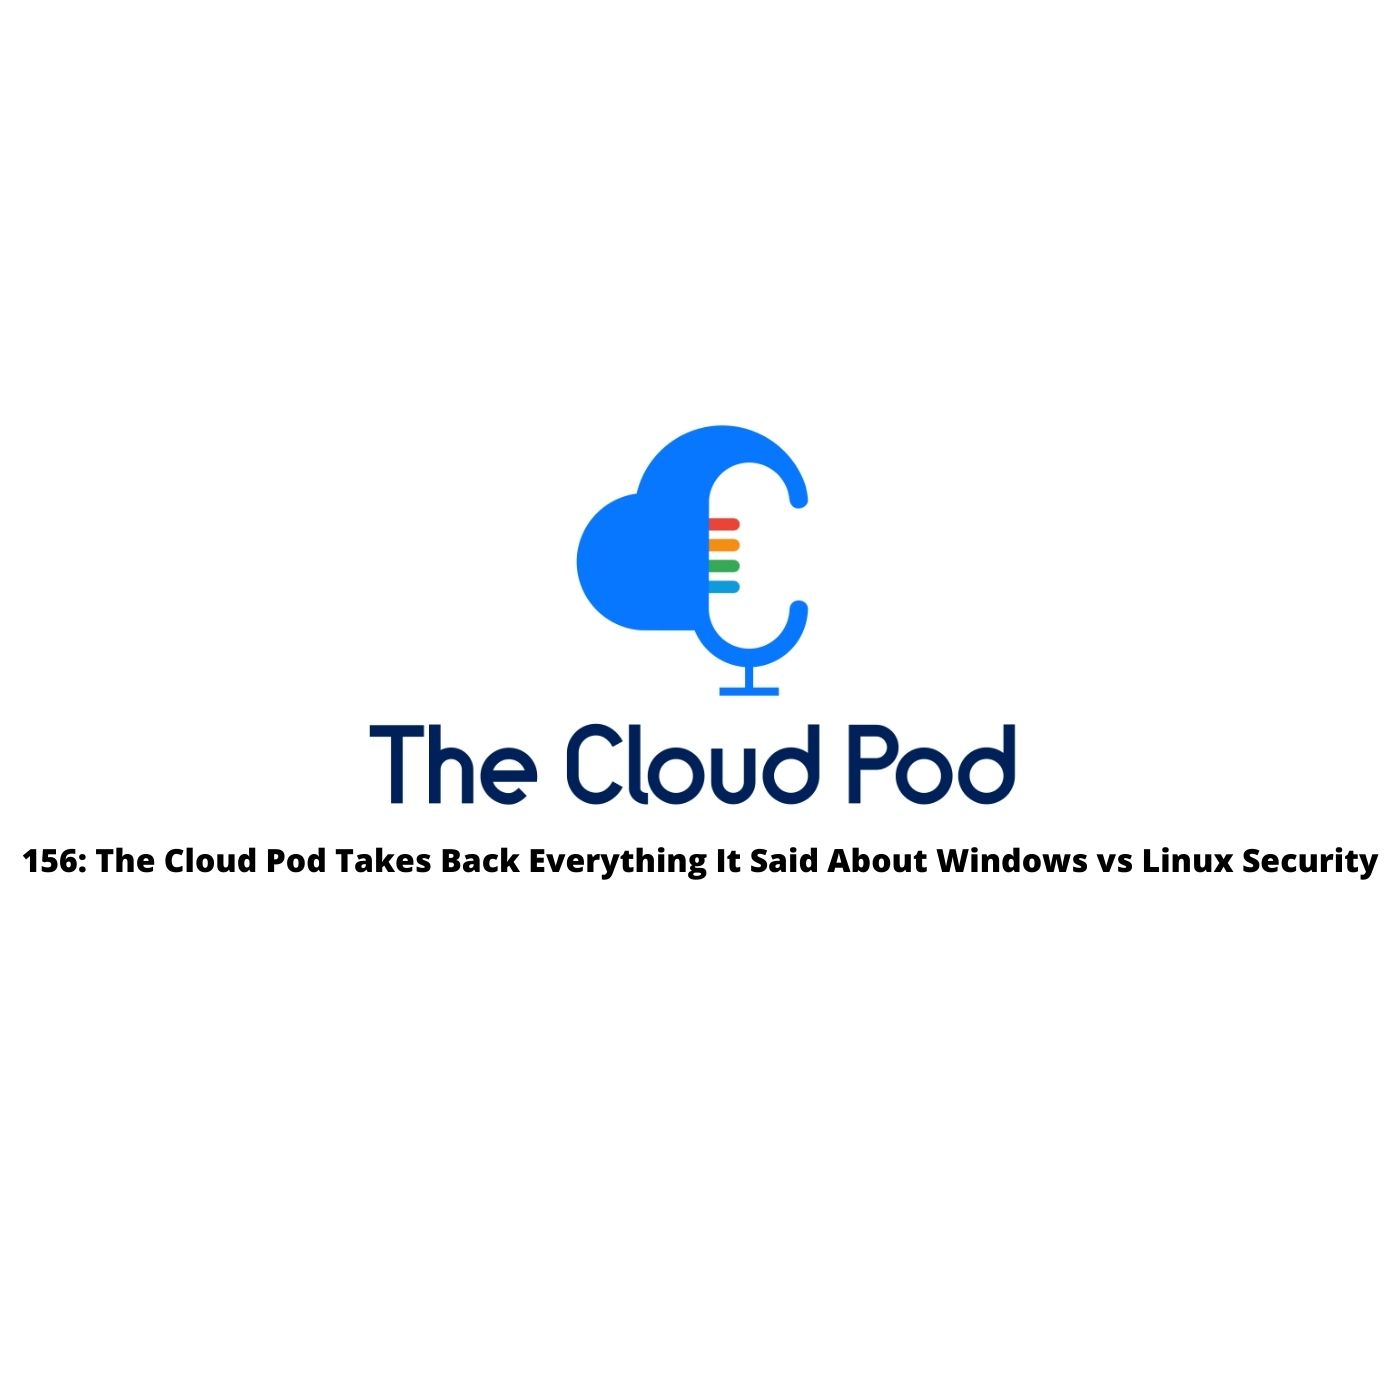 156: The Cloud Pod Takes Back Everything It Said About Windows vs Linux Security